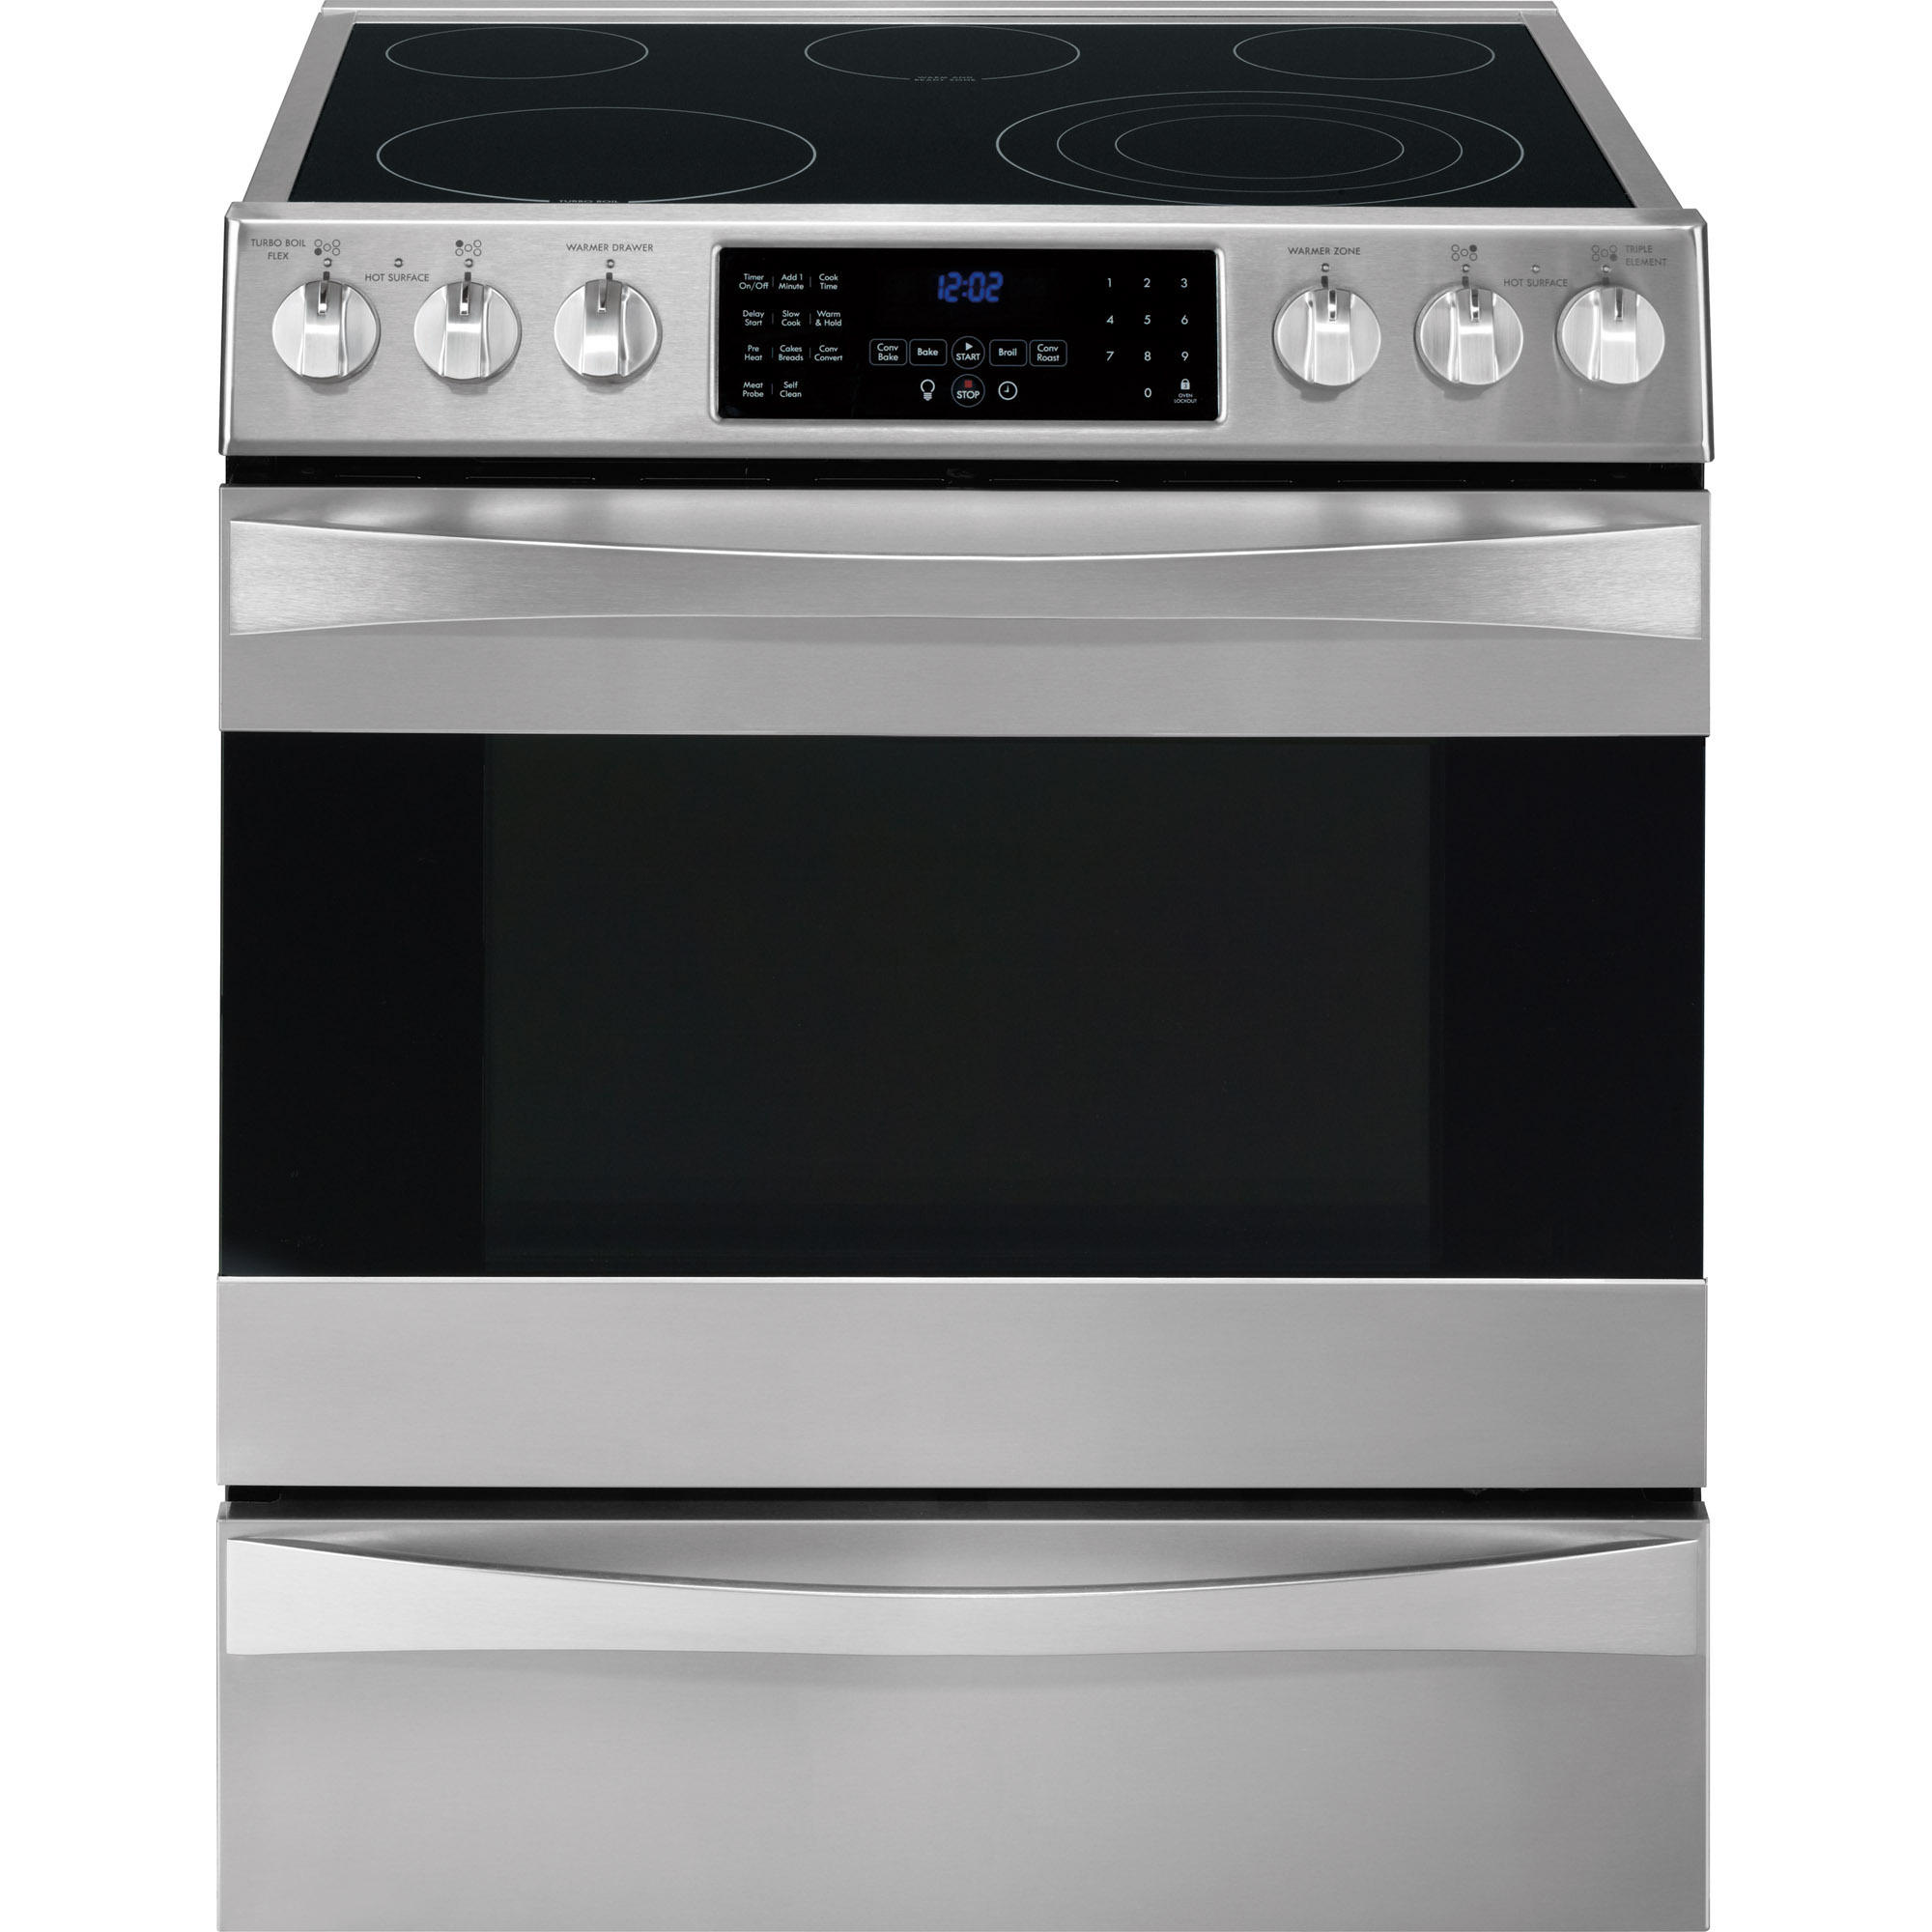 0012505803352 - 41313 4.6 CU. FT. SELF-CLEAN ELECTRIC DUAL TRUE CONVECTION RANGE - STAINLESS STEEL